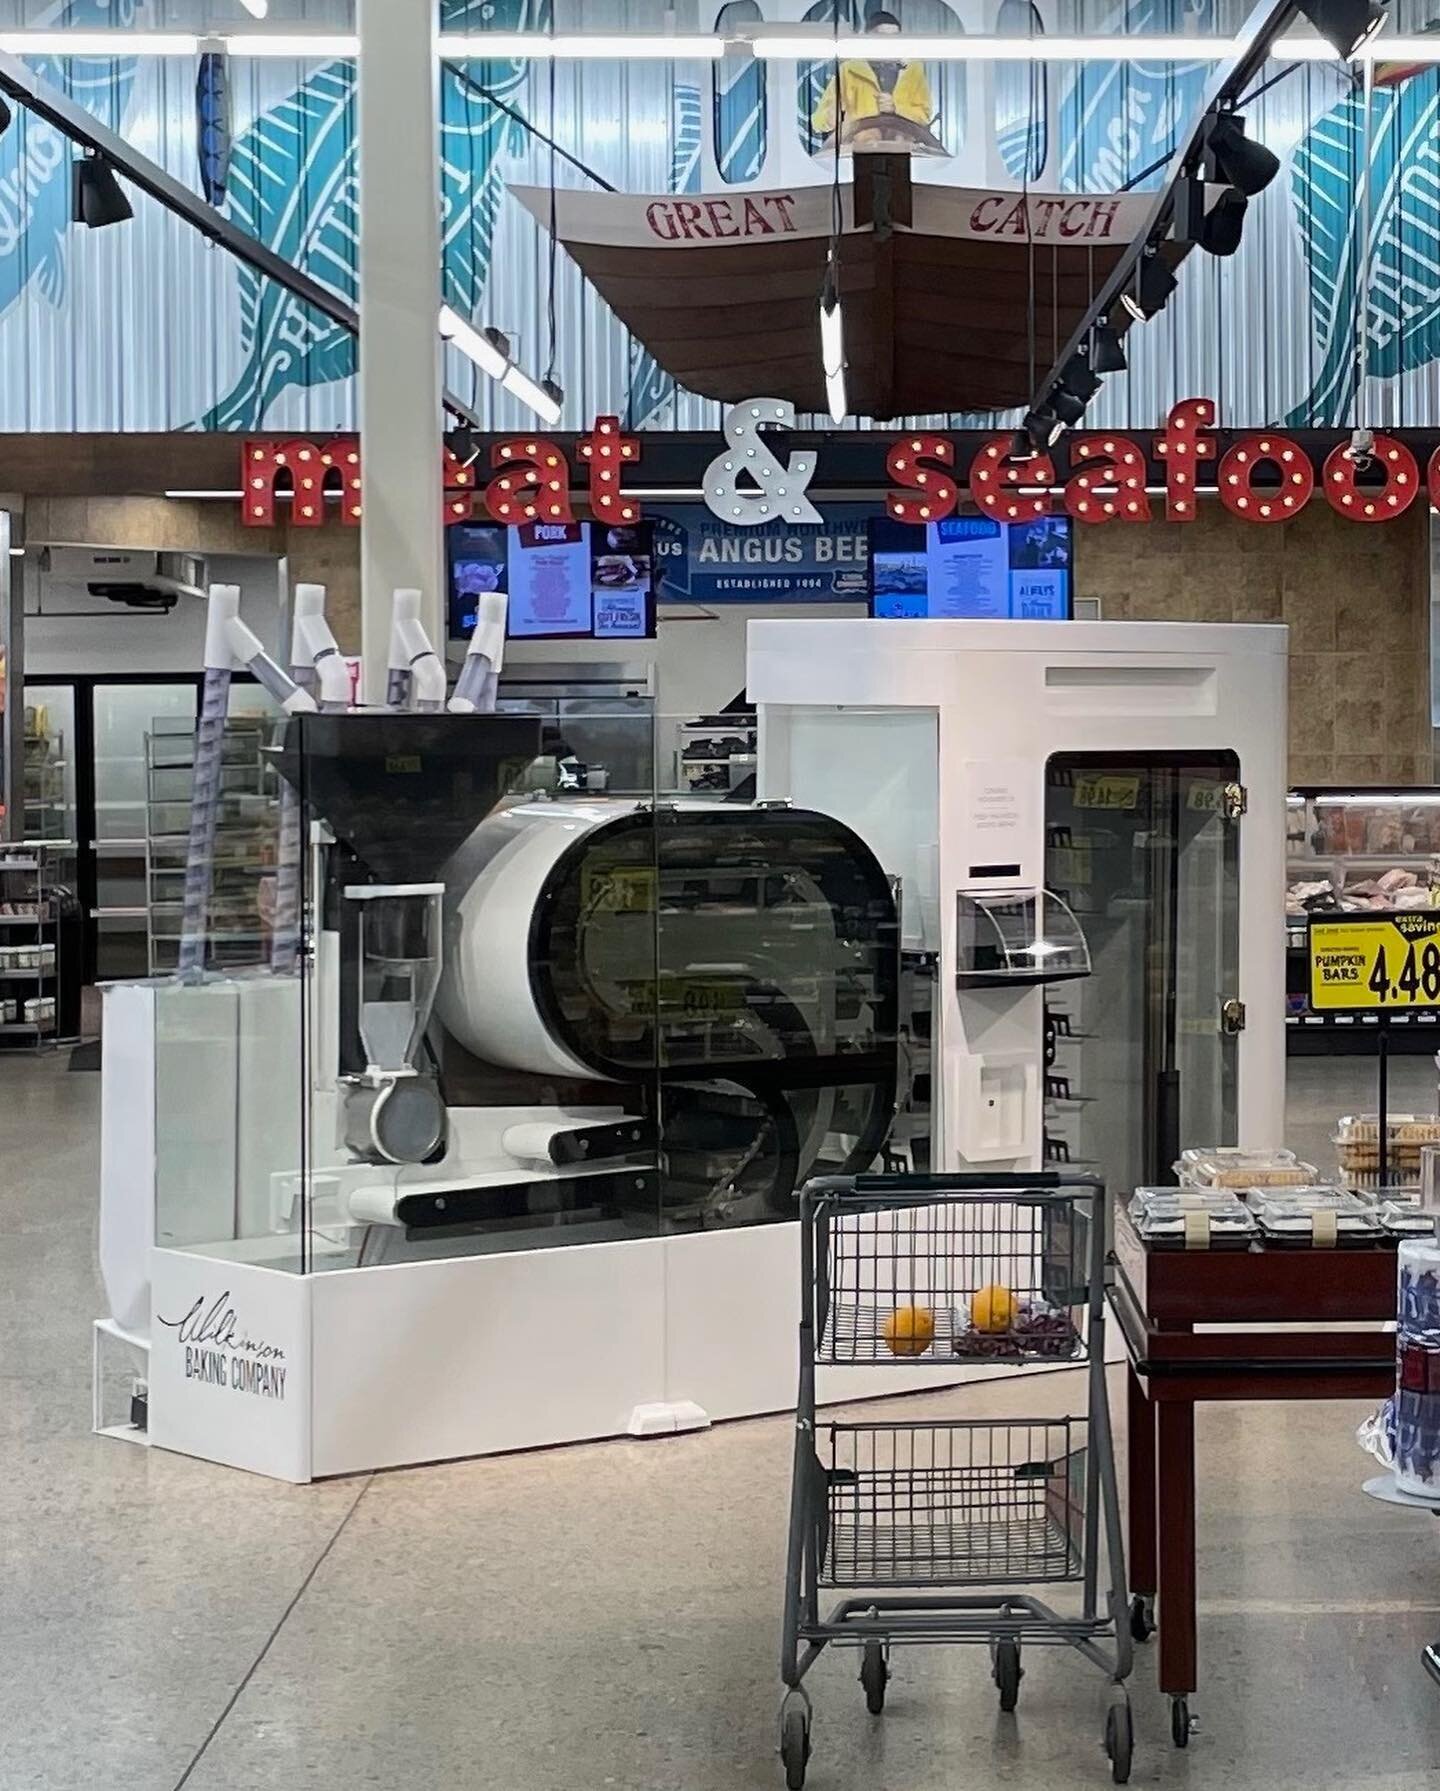 We officially launched three new machines at @s1foods Idaho locations: Athol, Oldtown, and Sandpoint. Come get a #hotloaf if you&rsquo;re in the area!

#foodtech #freshbread